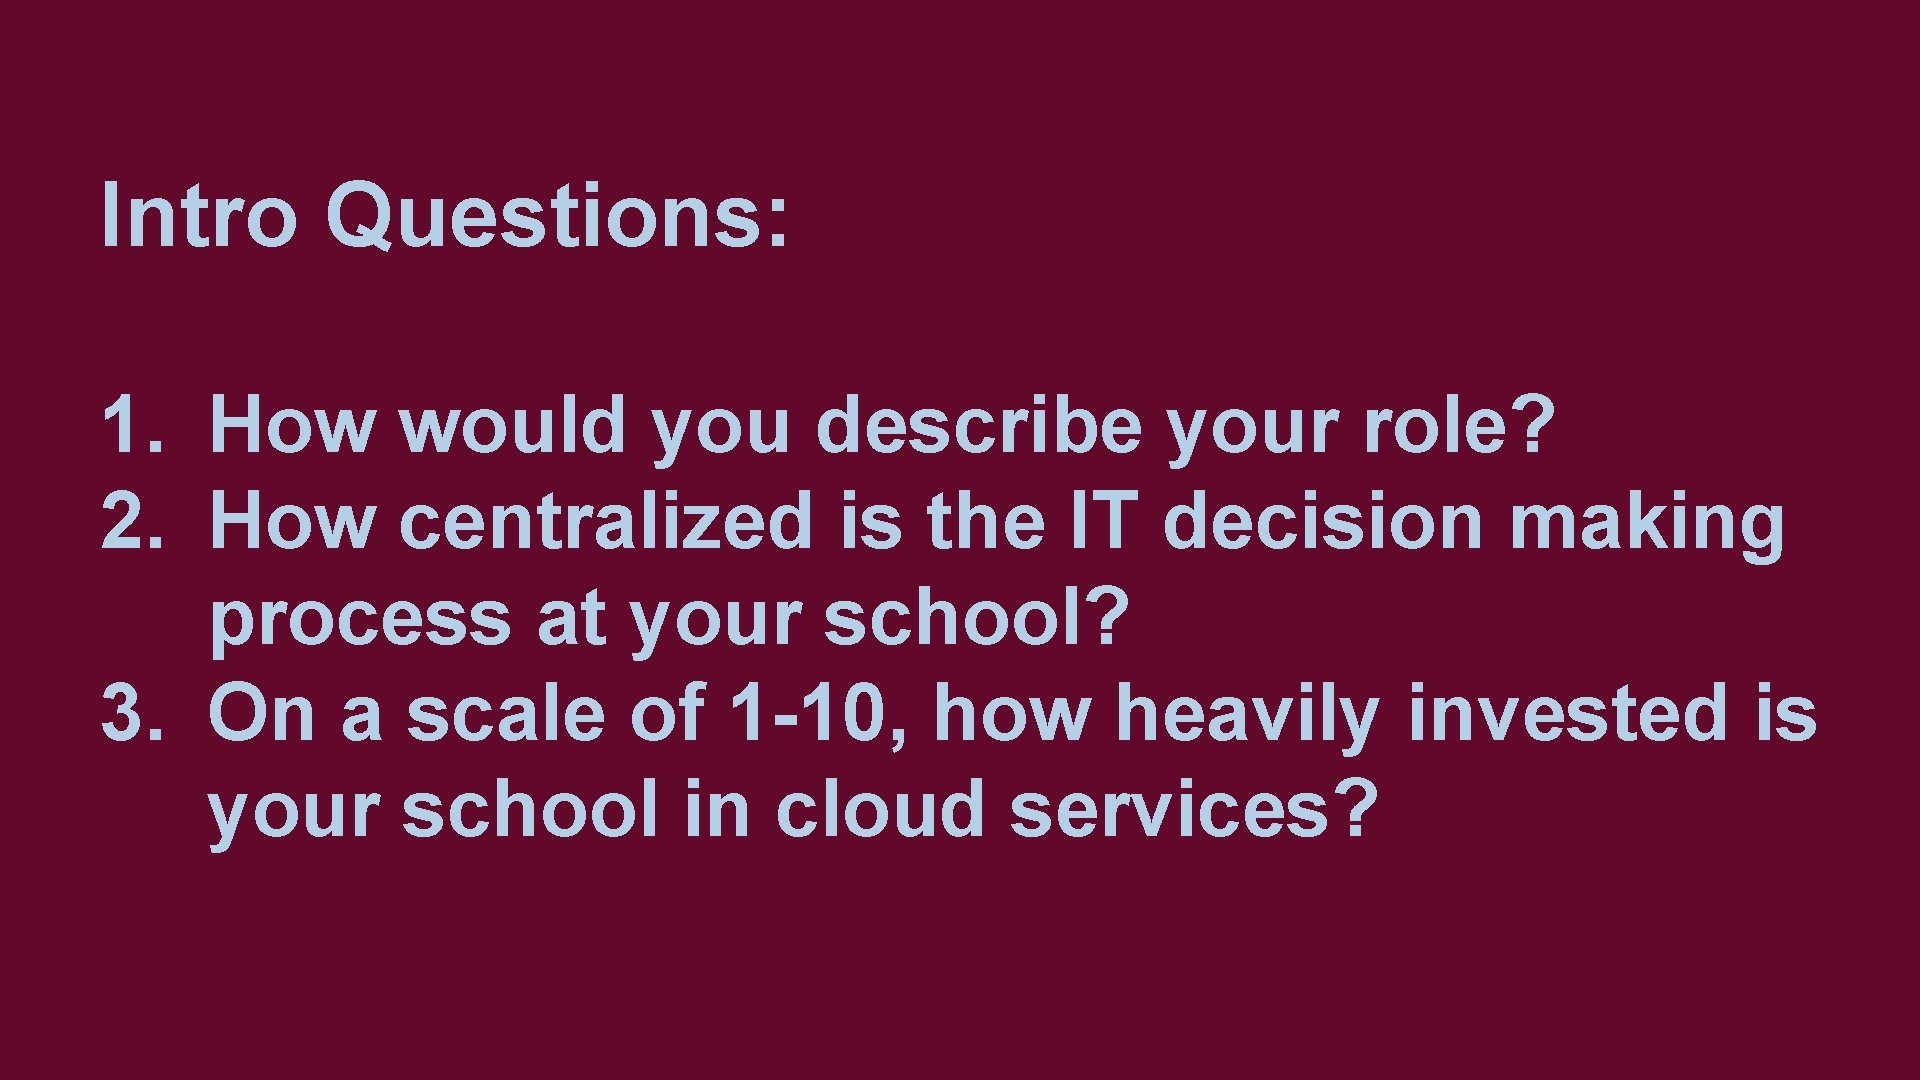 Intro Questions: 1. How would you describe your role? 2. How centralized is the